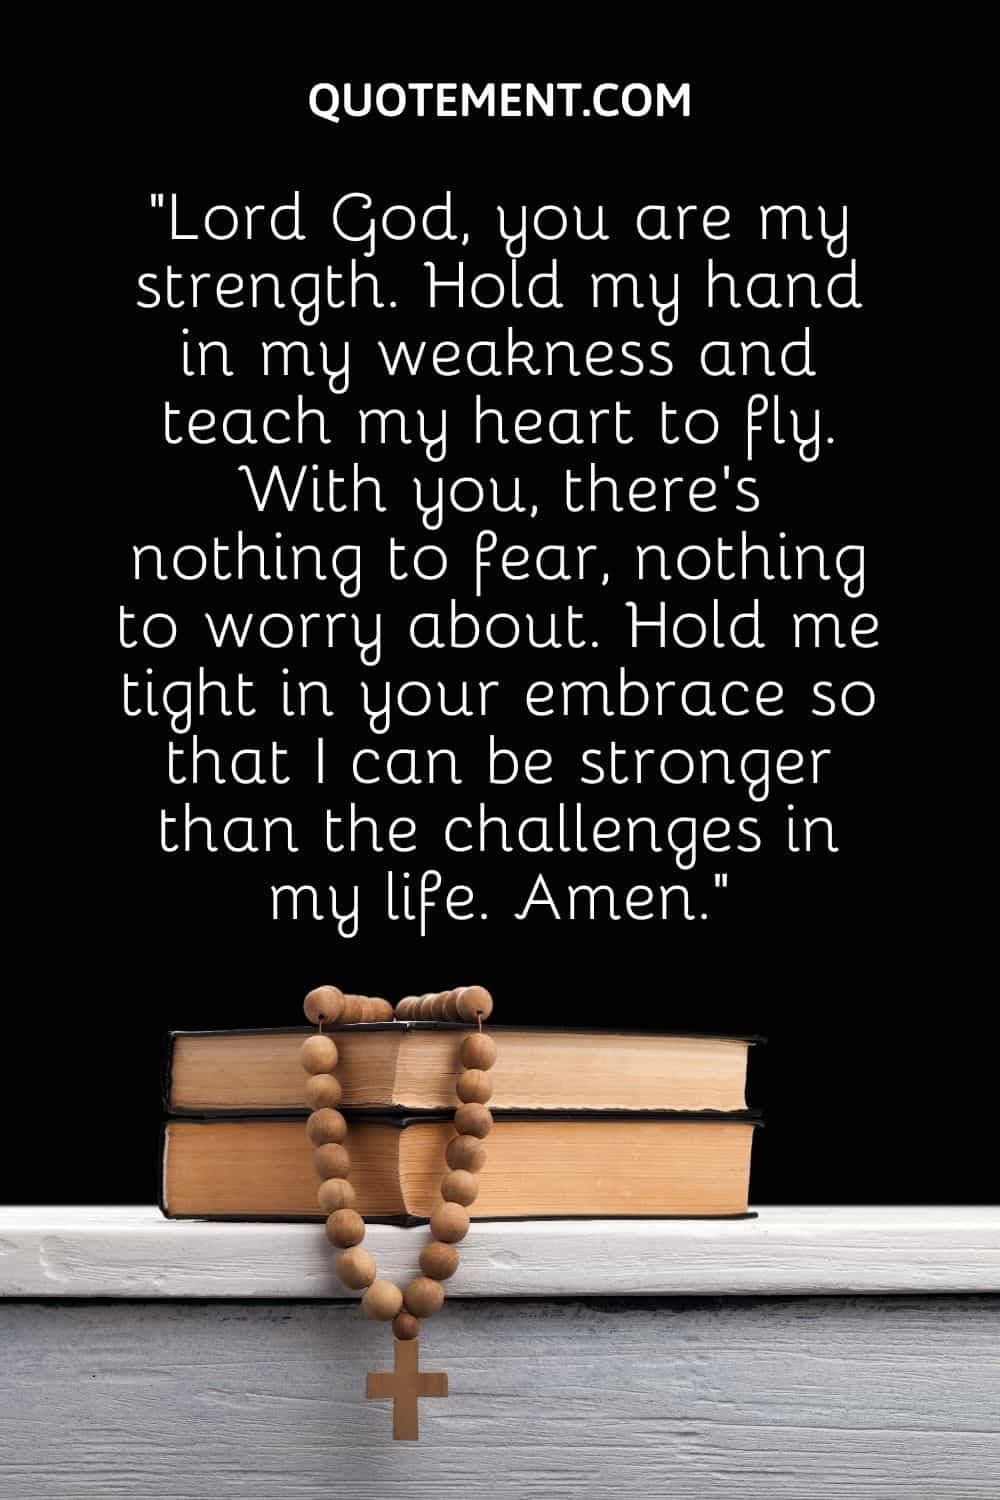 Lord God, you are my strength